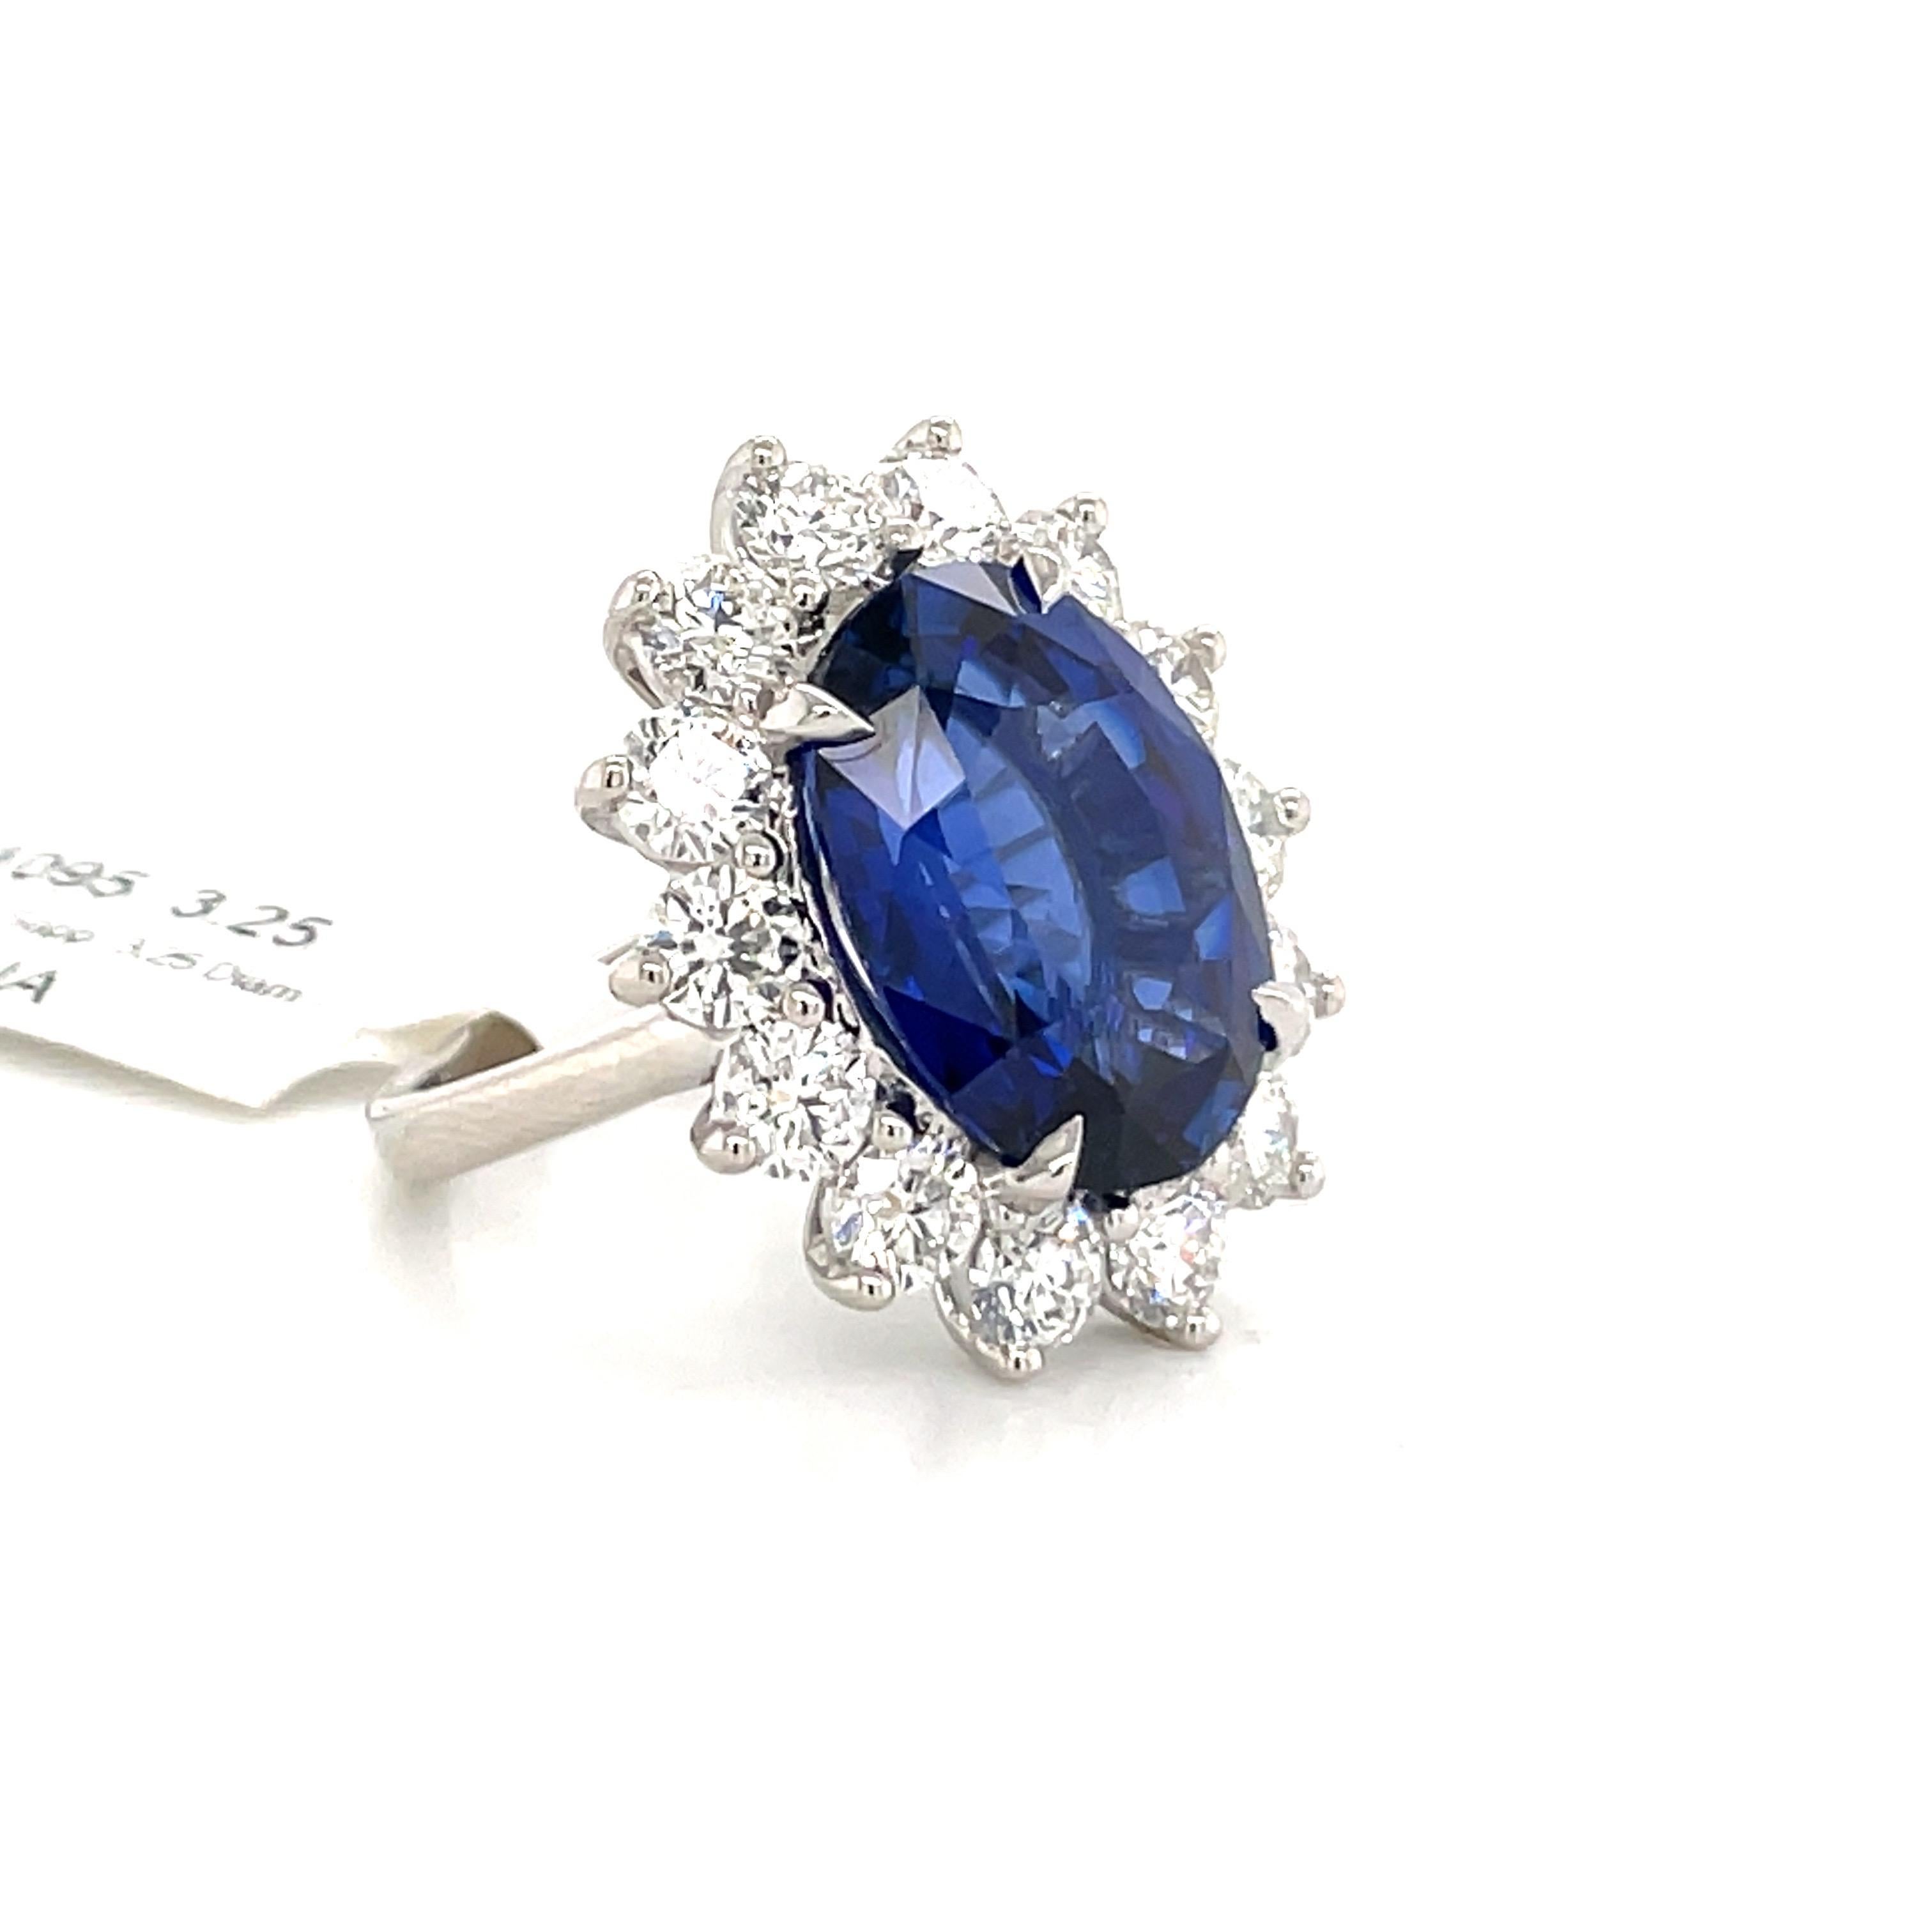 Oval Cut Princess Diana Inspired GIA Certified Sapphire Diamond Ring 15.31 Carats F VS